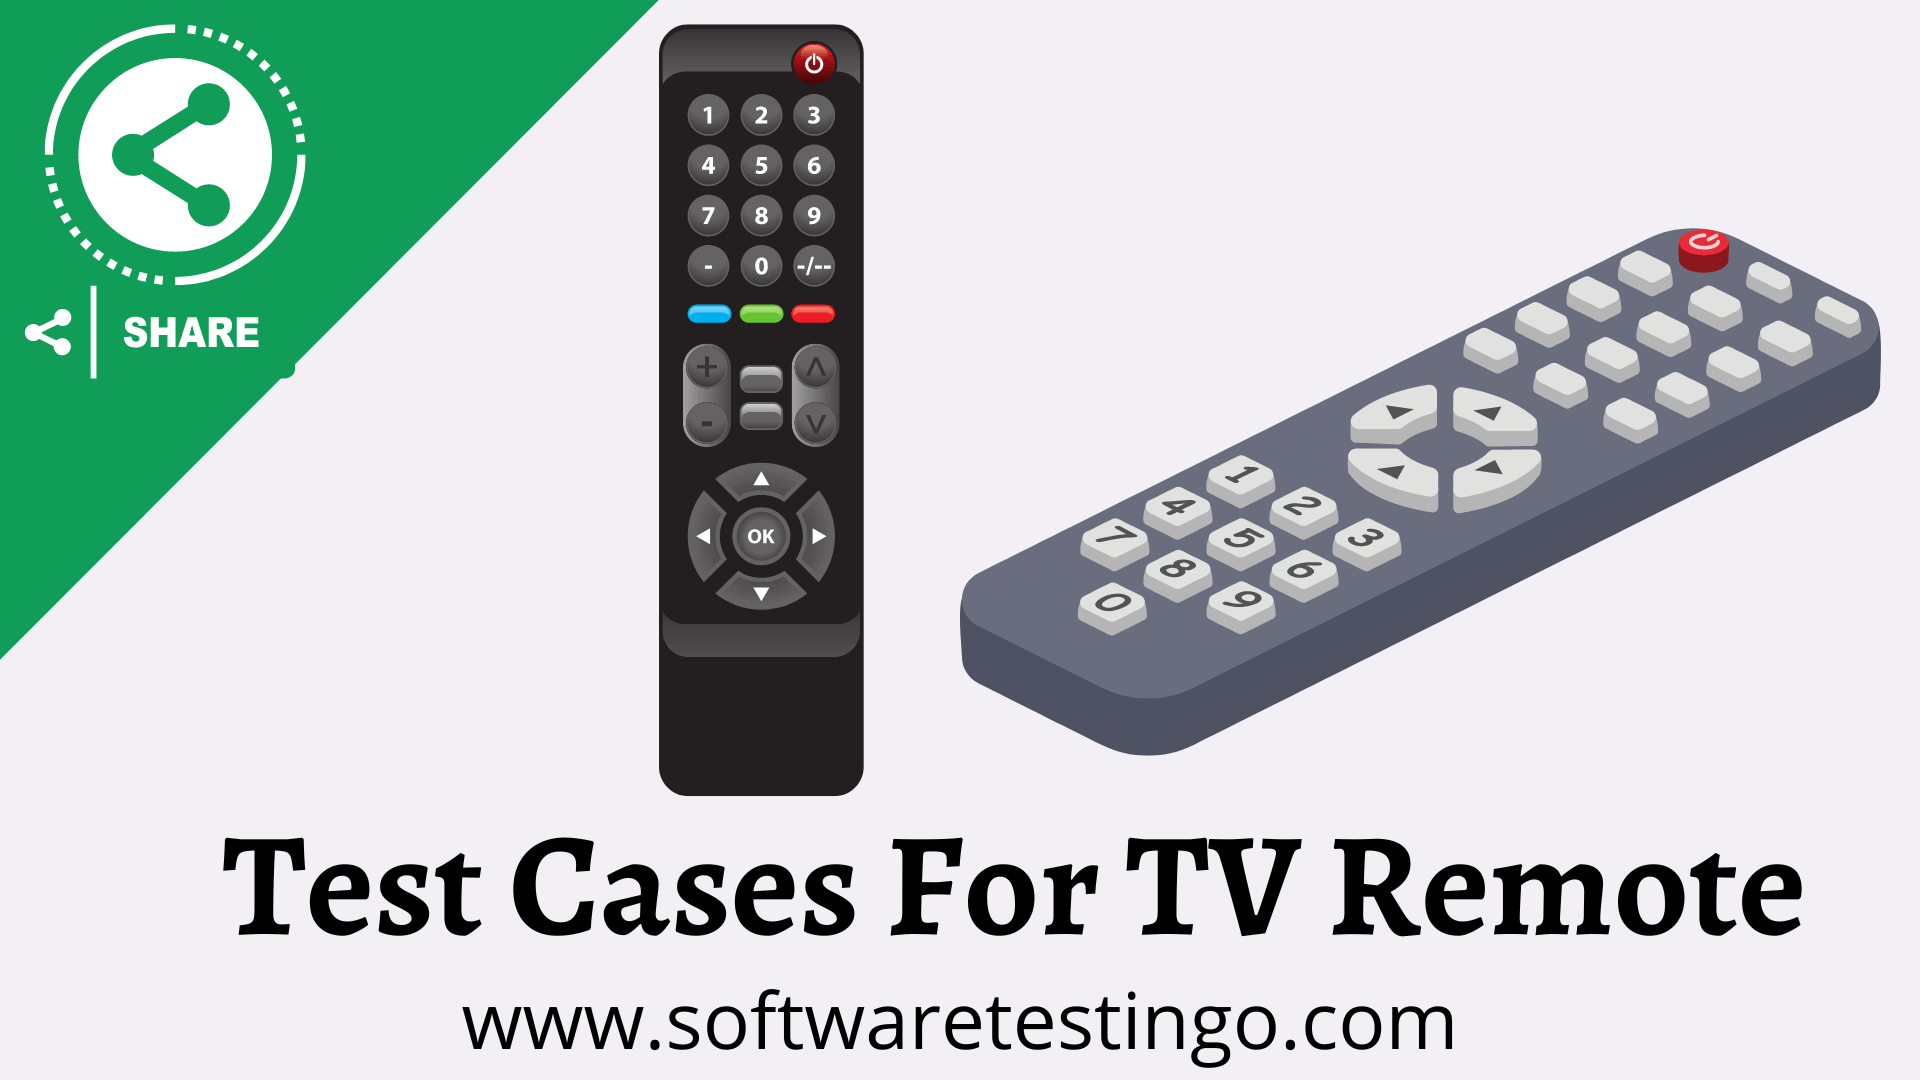 Test Cases For TV Remote